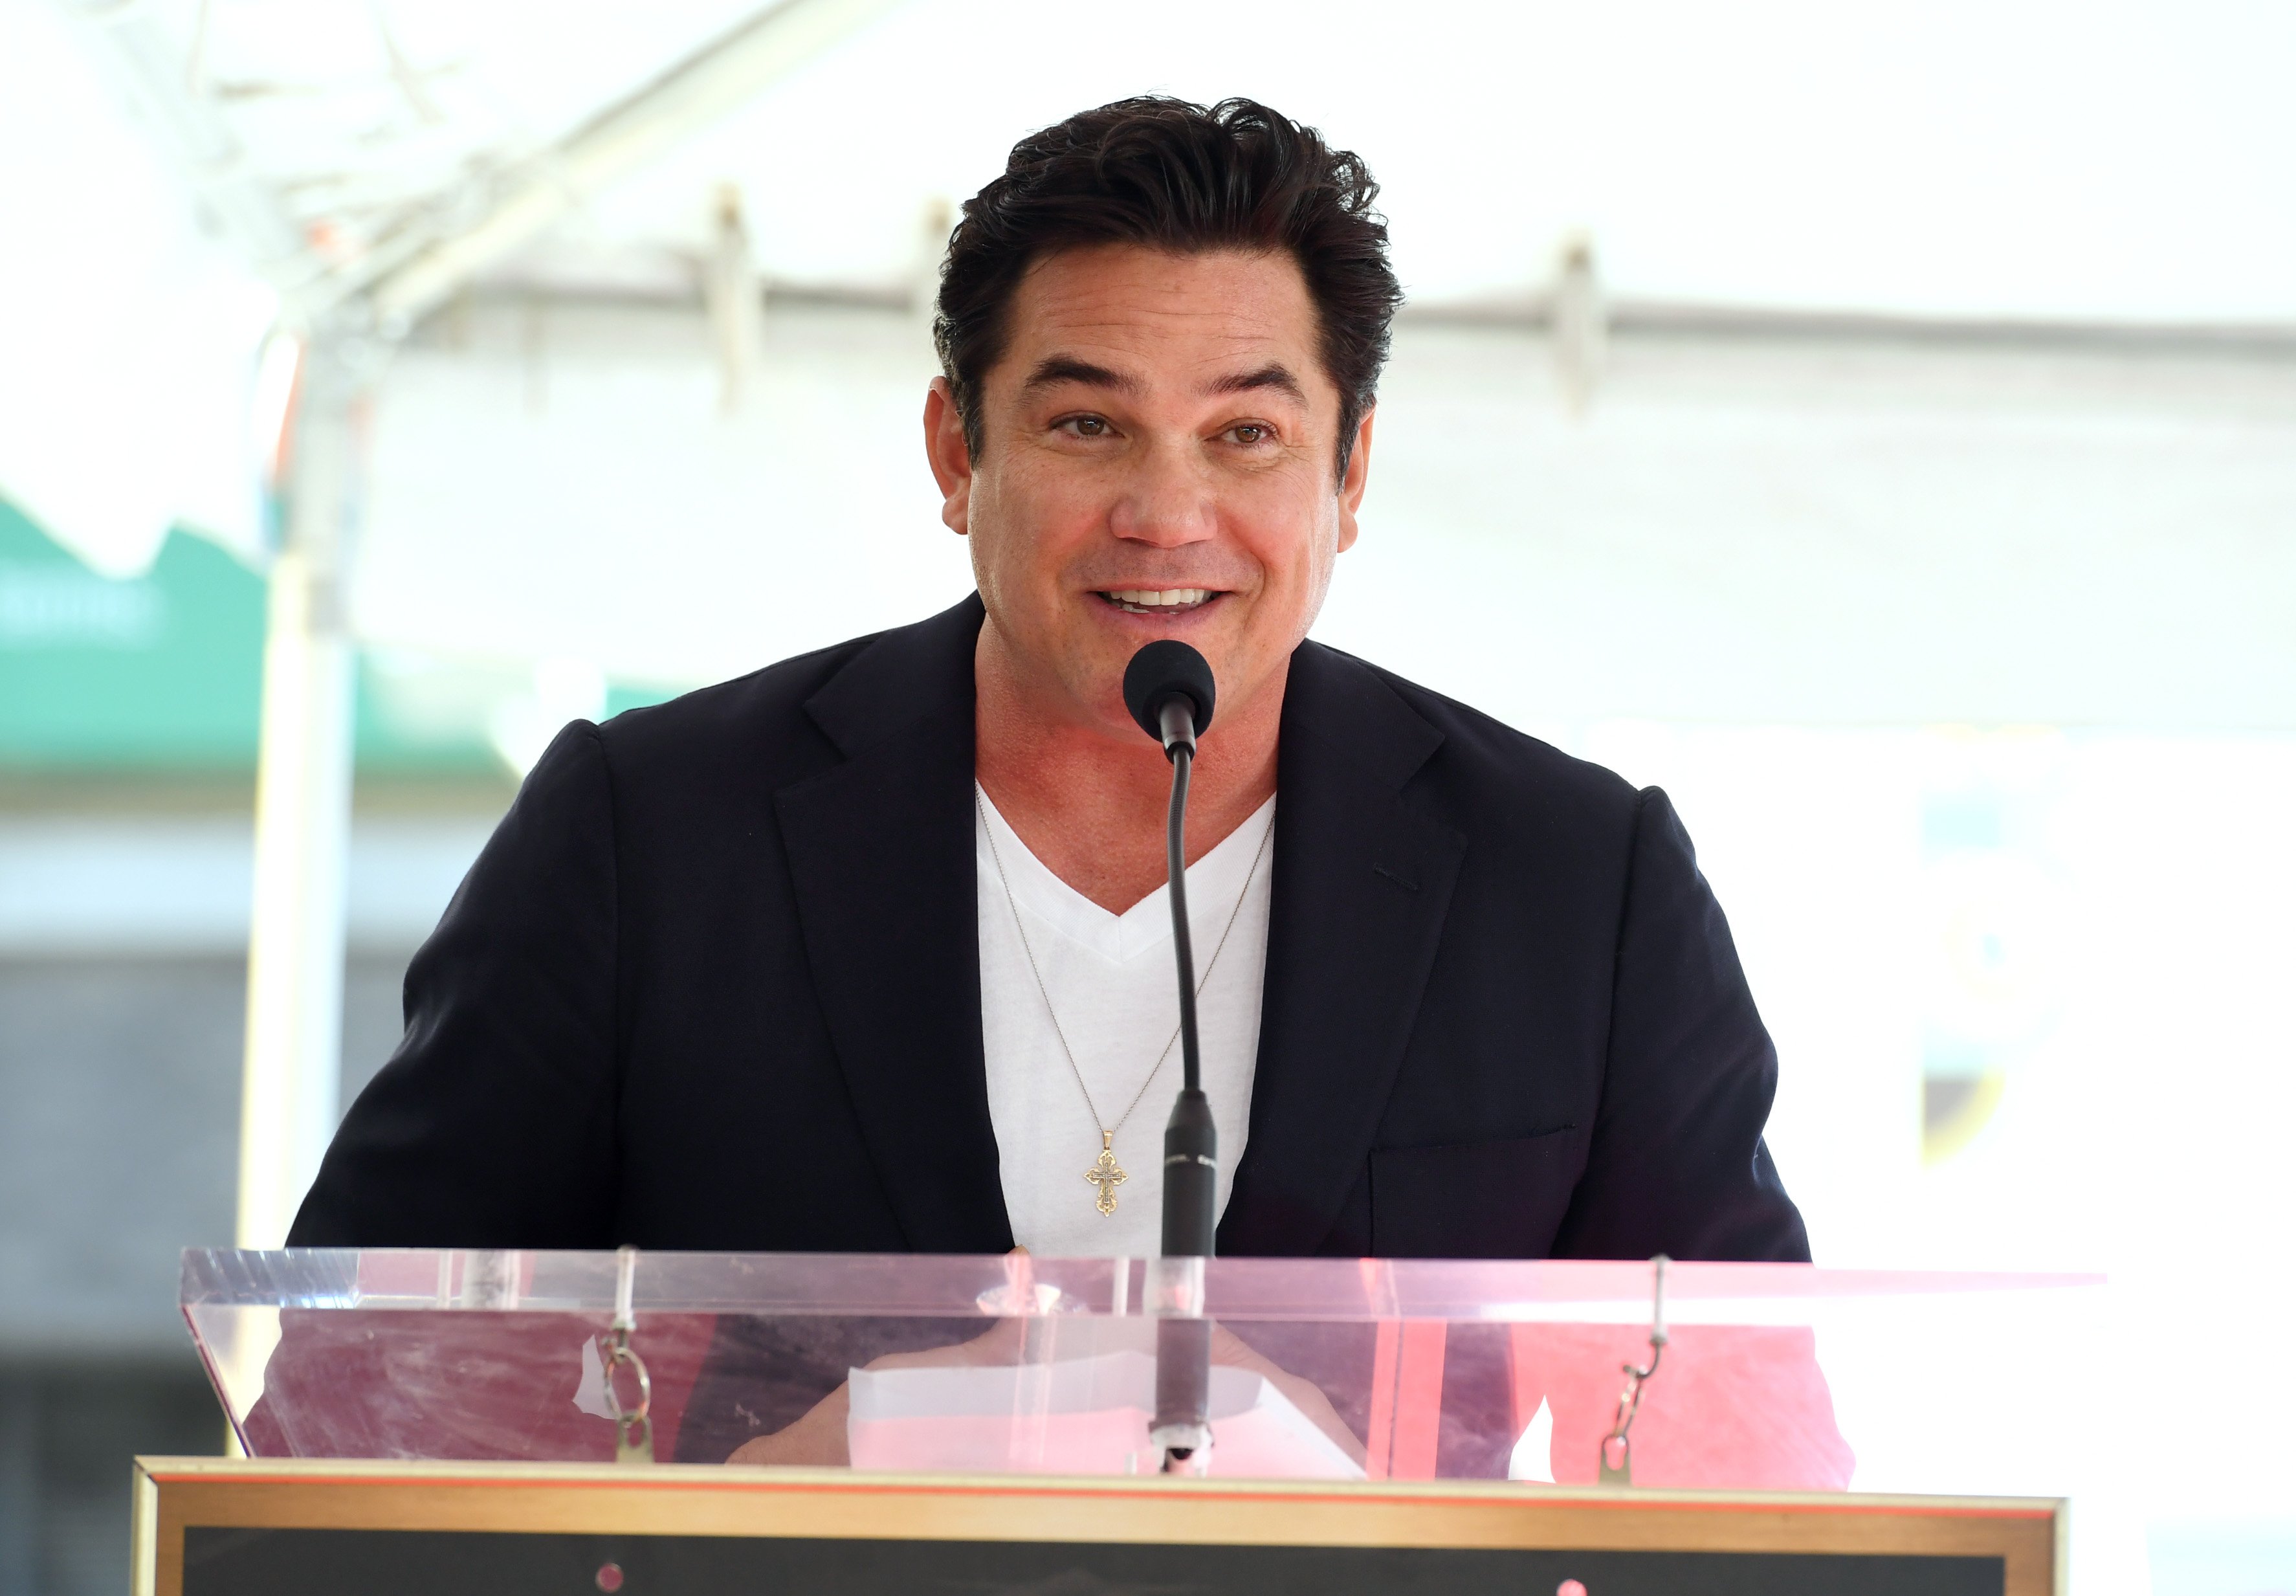 Dean Cain speaks during Dr. Oz Honored With Star On The Hollywood Walk Of Fame on February 11, 2022, in Hollywood, California. | Source: Getty Images